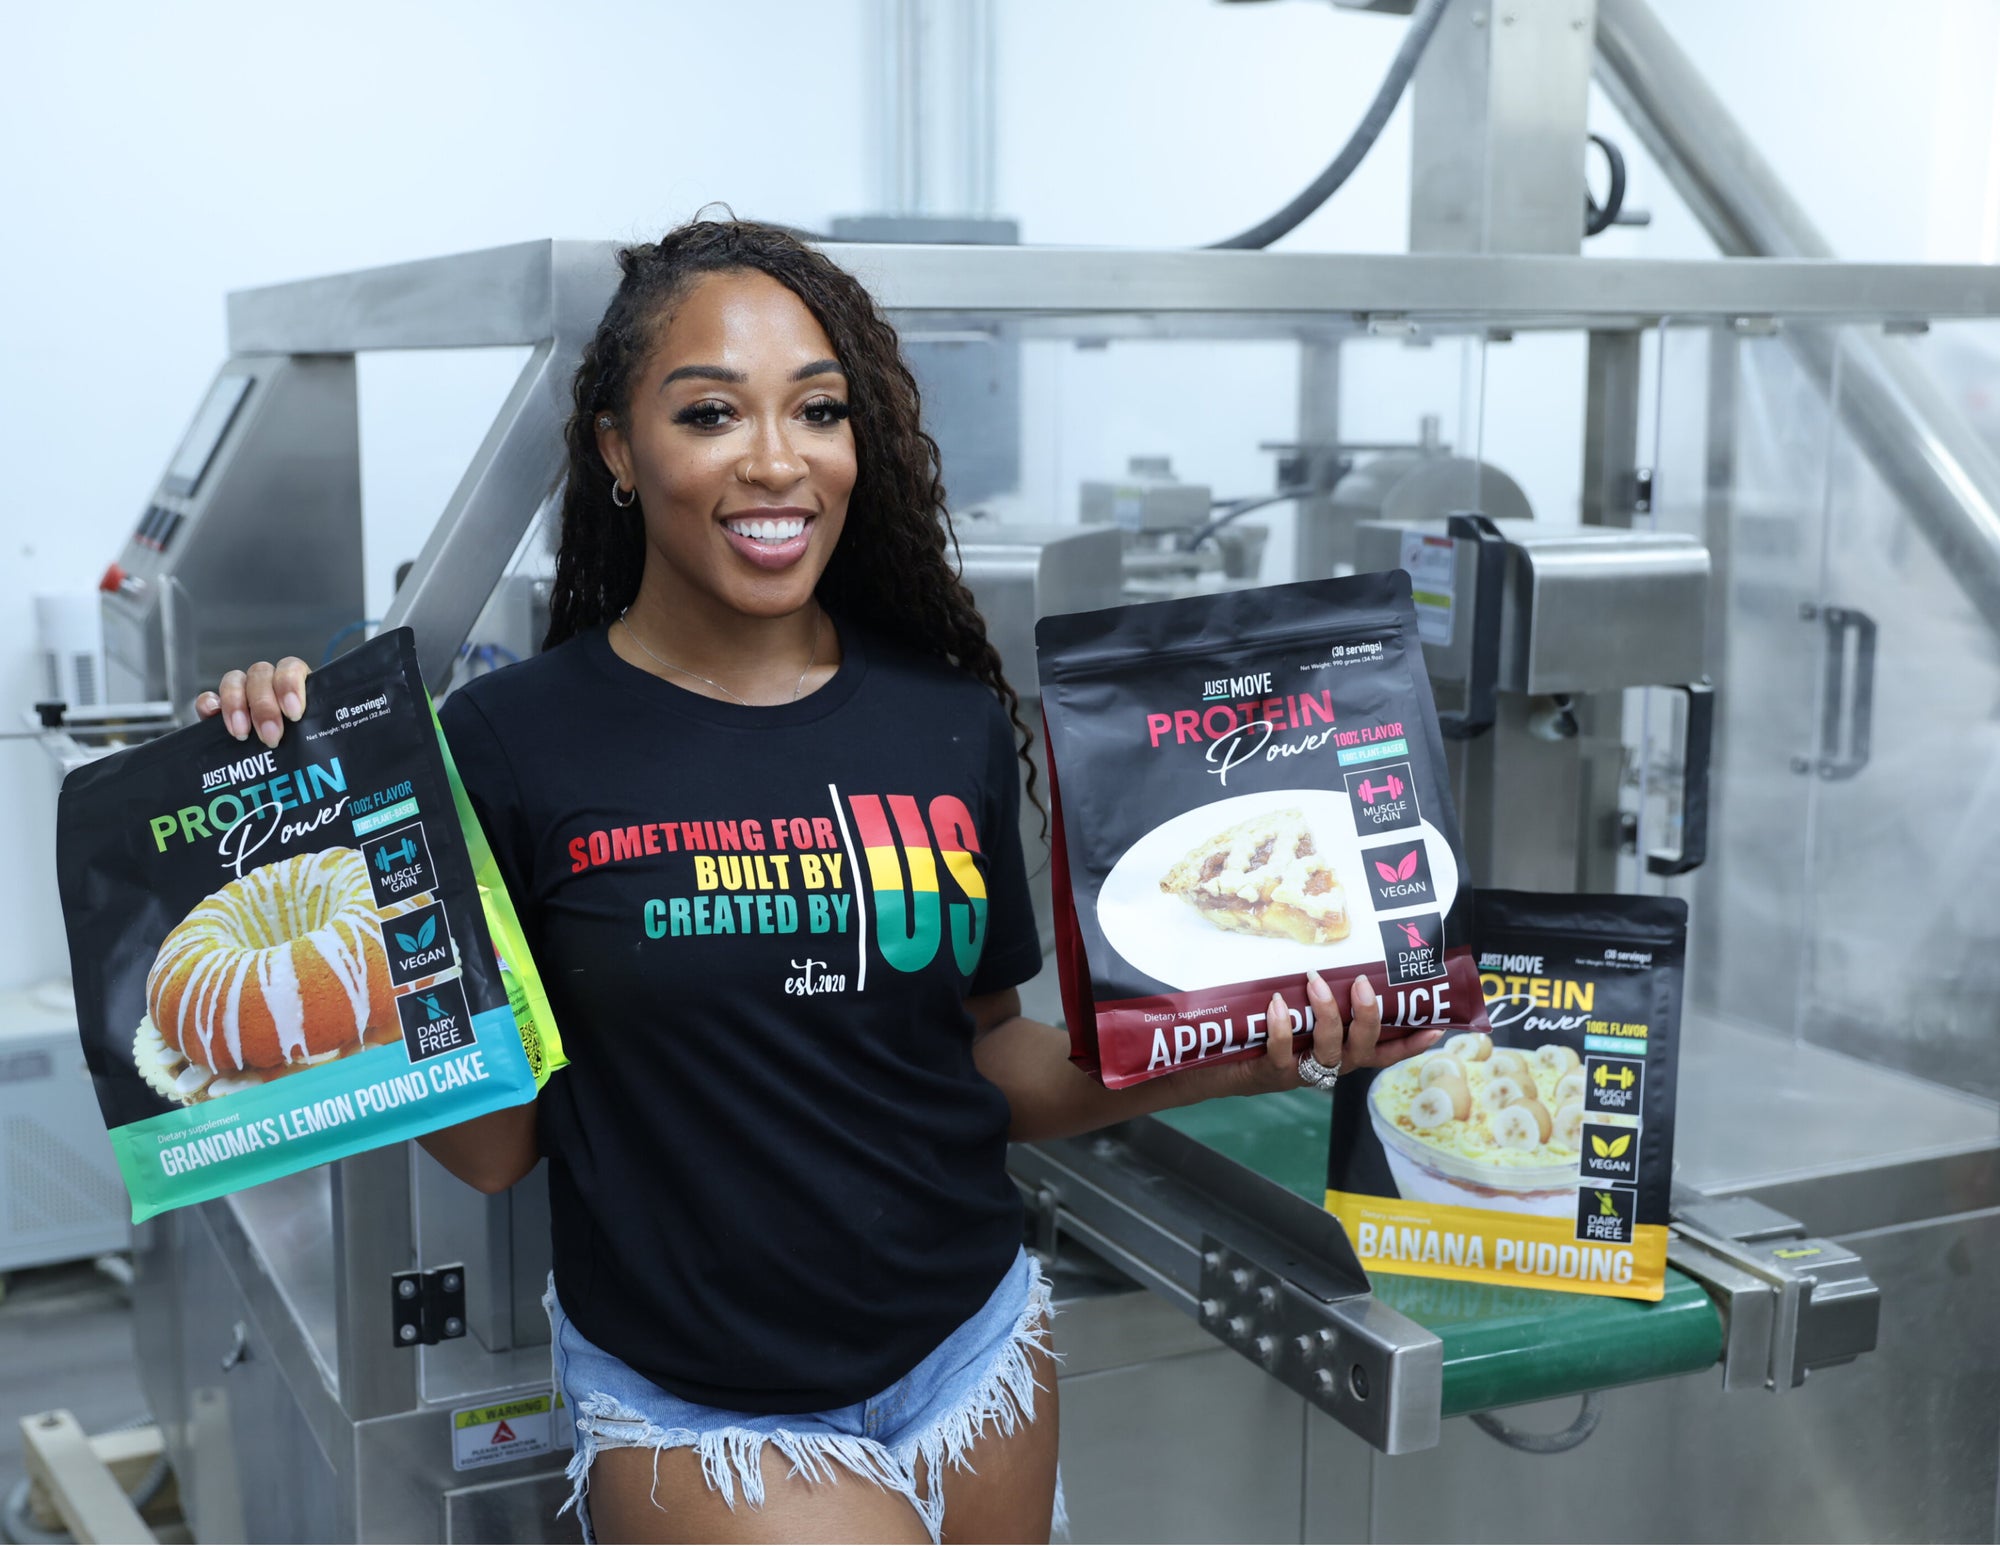 CEO and creator of Just Move Supplements - Keaira LaShae